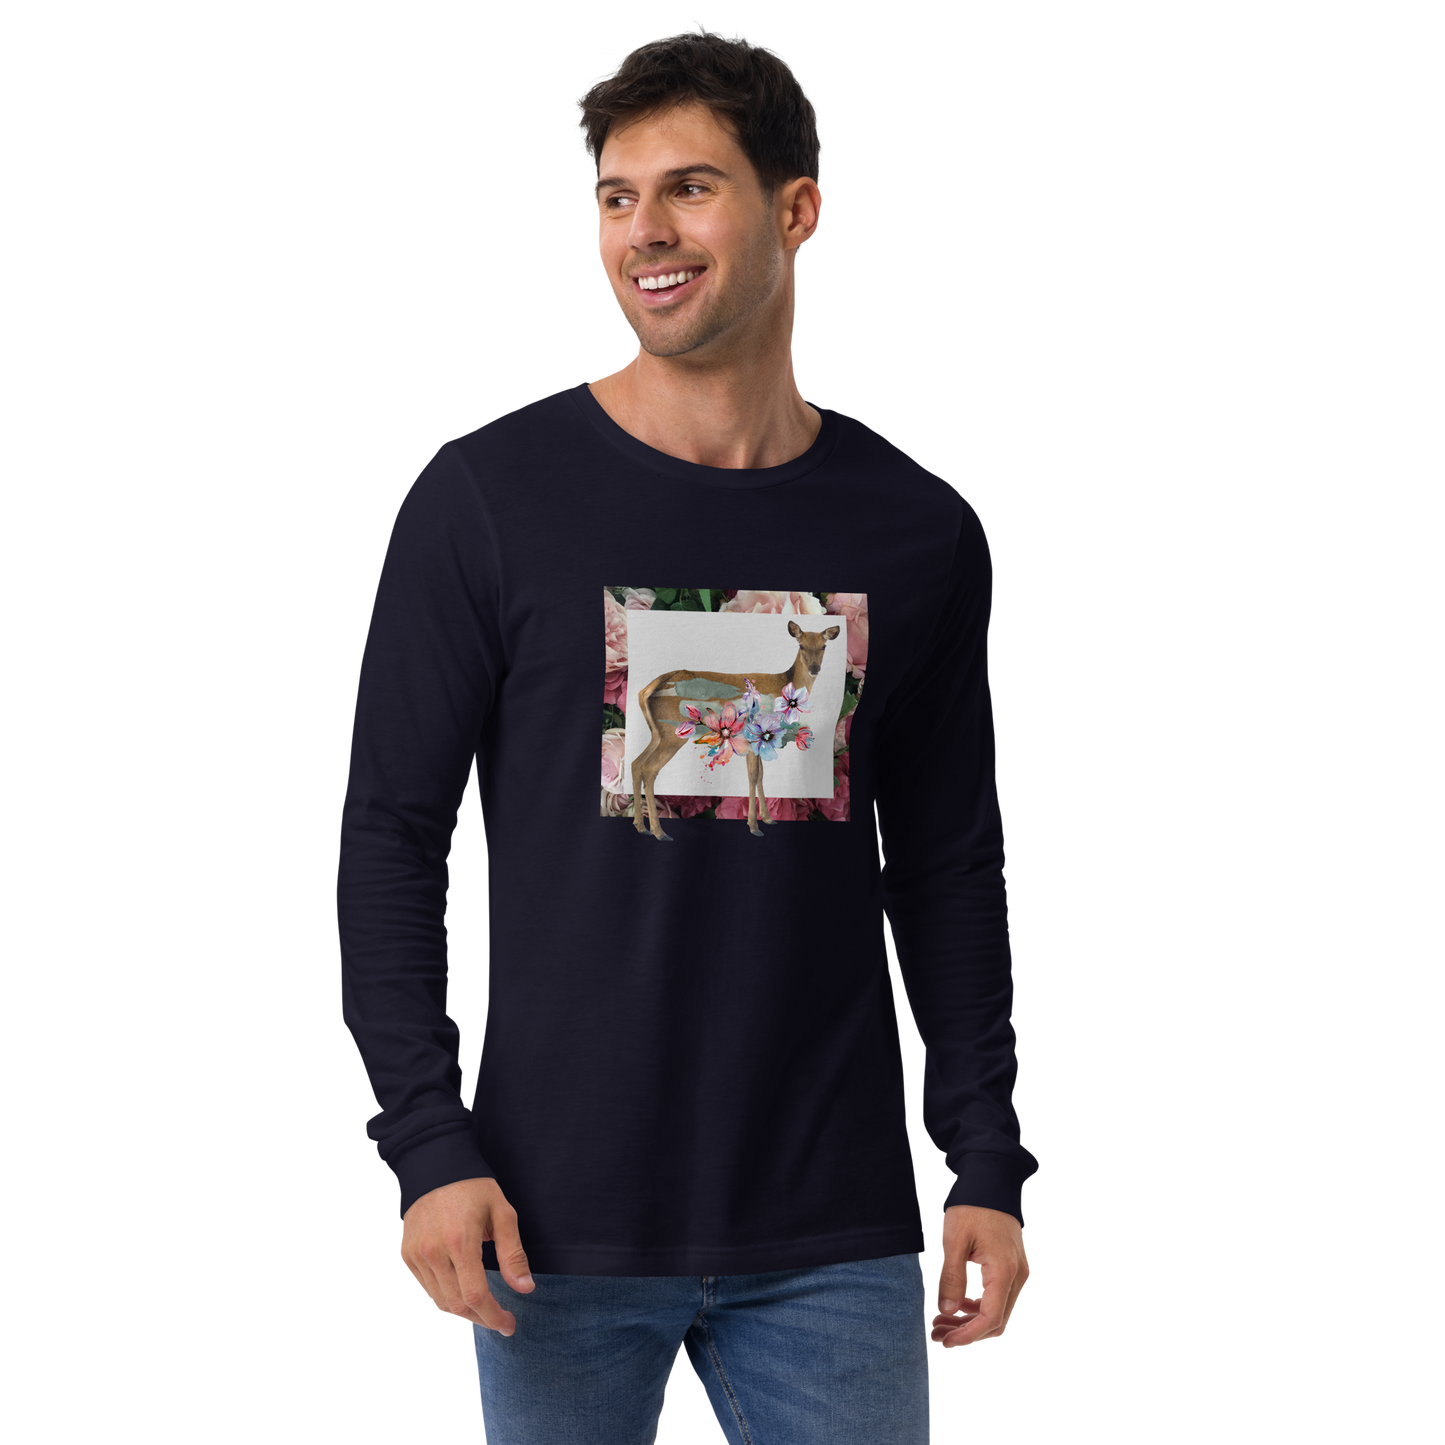 Smiling Man Wearing a Navy Deer Long Sleeve Tee featuring a captivating Floral Deer graphic on the chest - Cute Deer Long Sleeve Graphic Tees - Boozy Fox